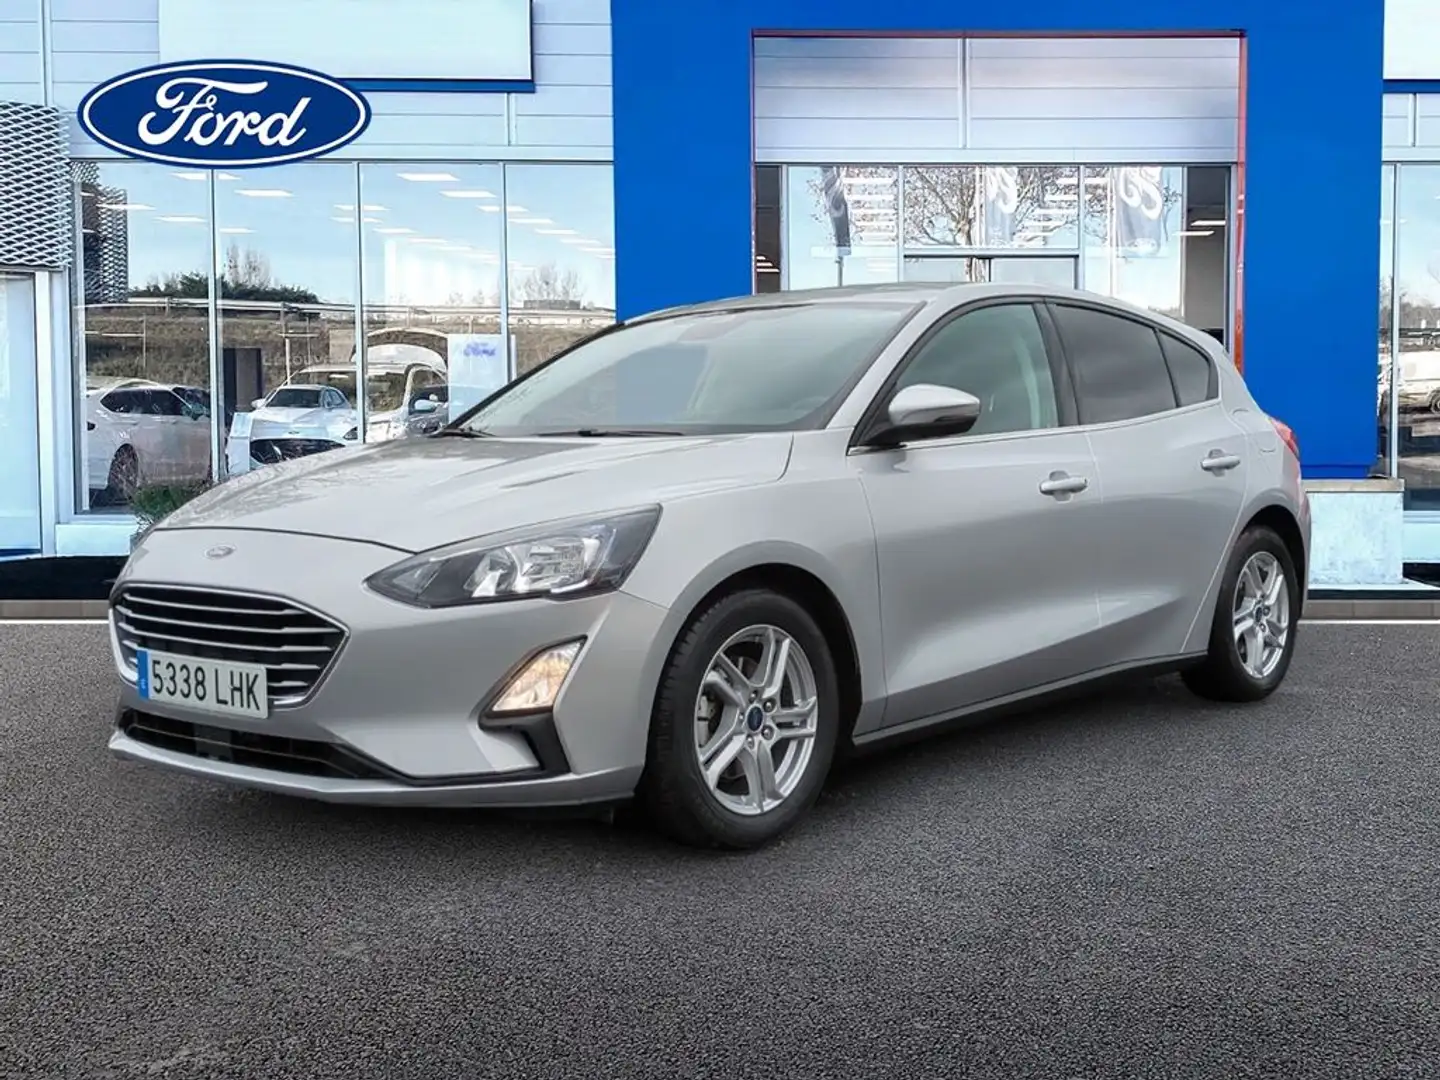 Ford Focus 1.0 Ecoboost Trend+ 125 - 1